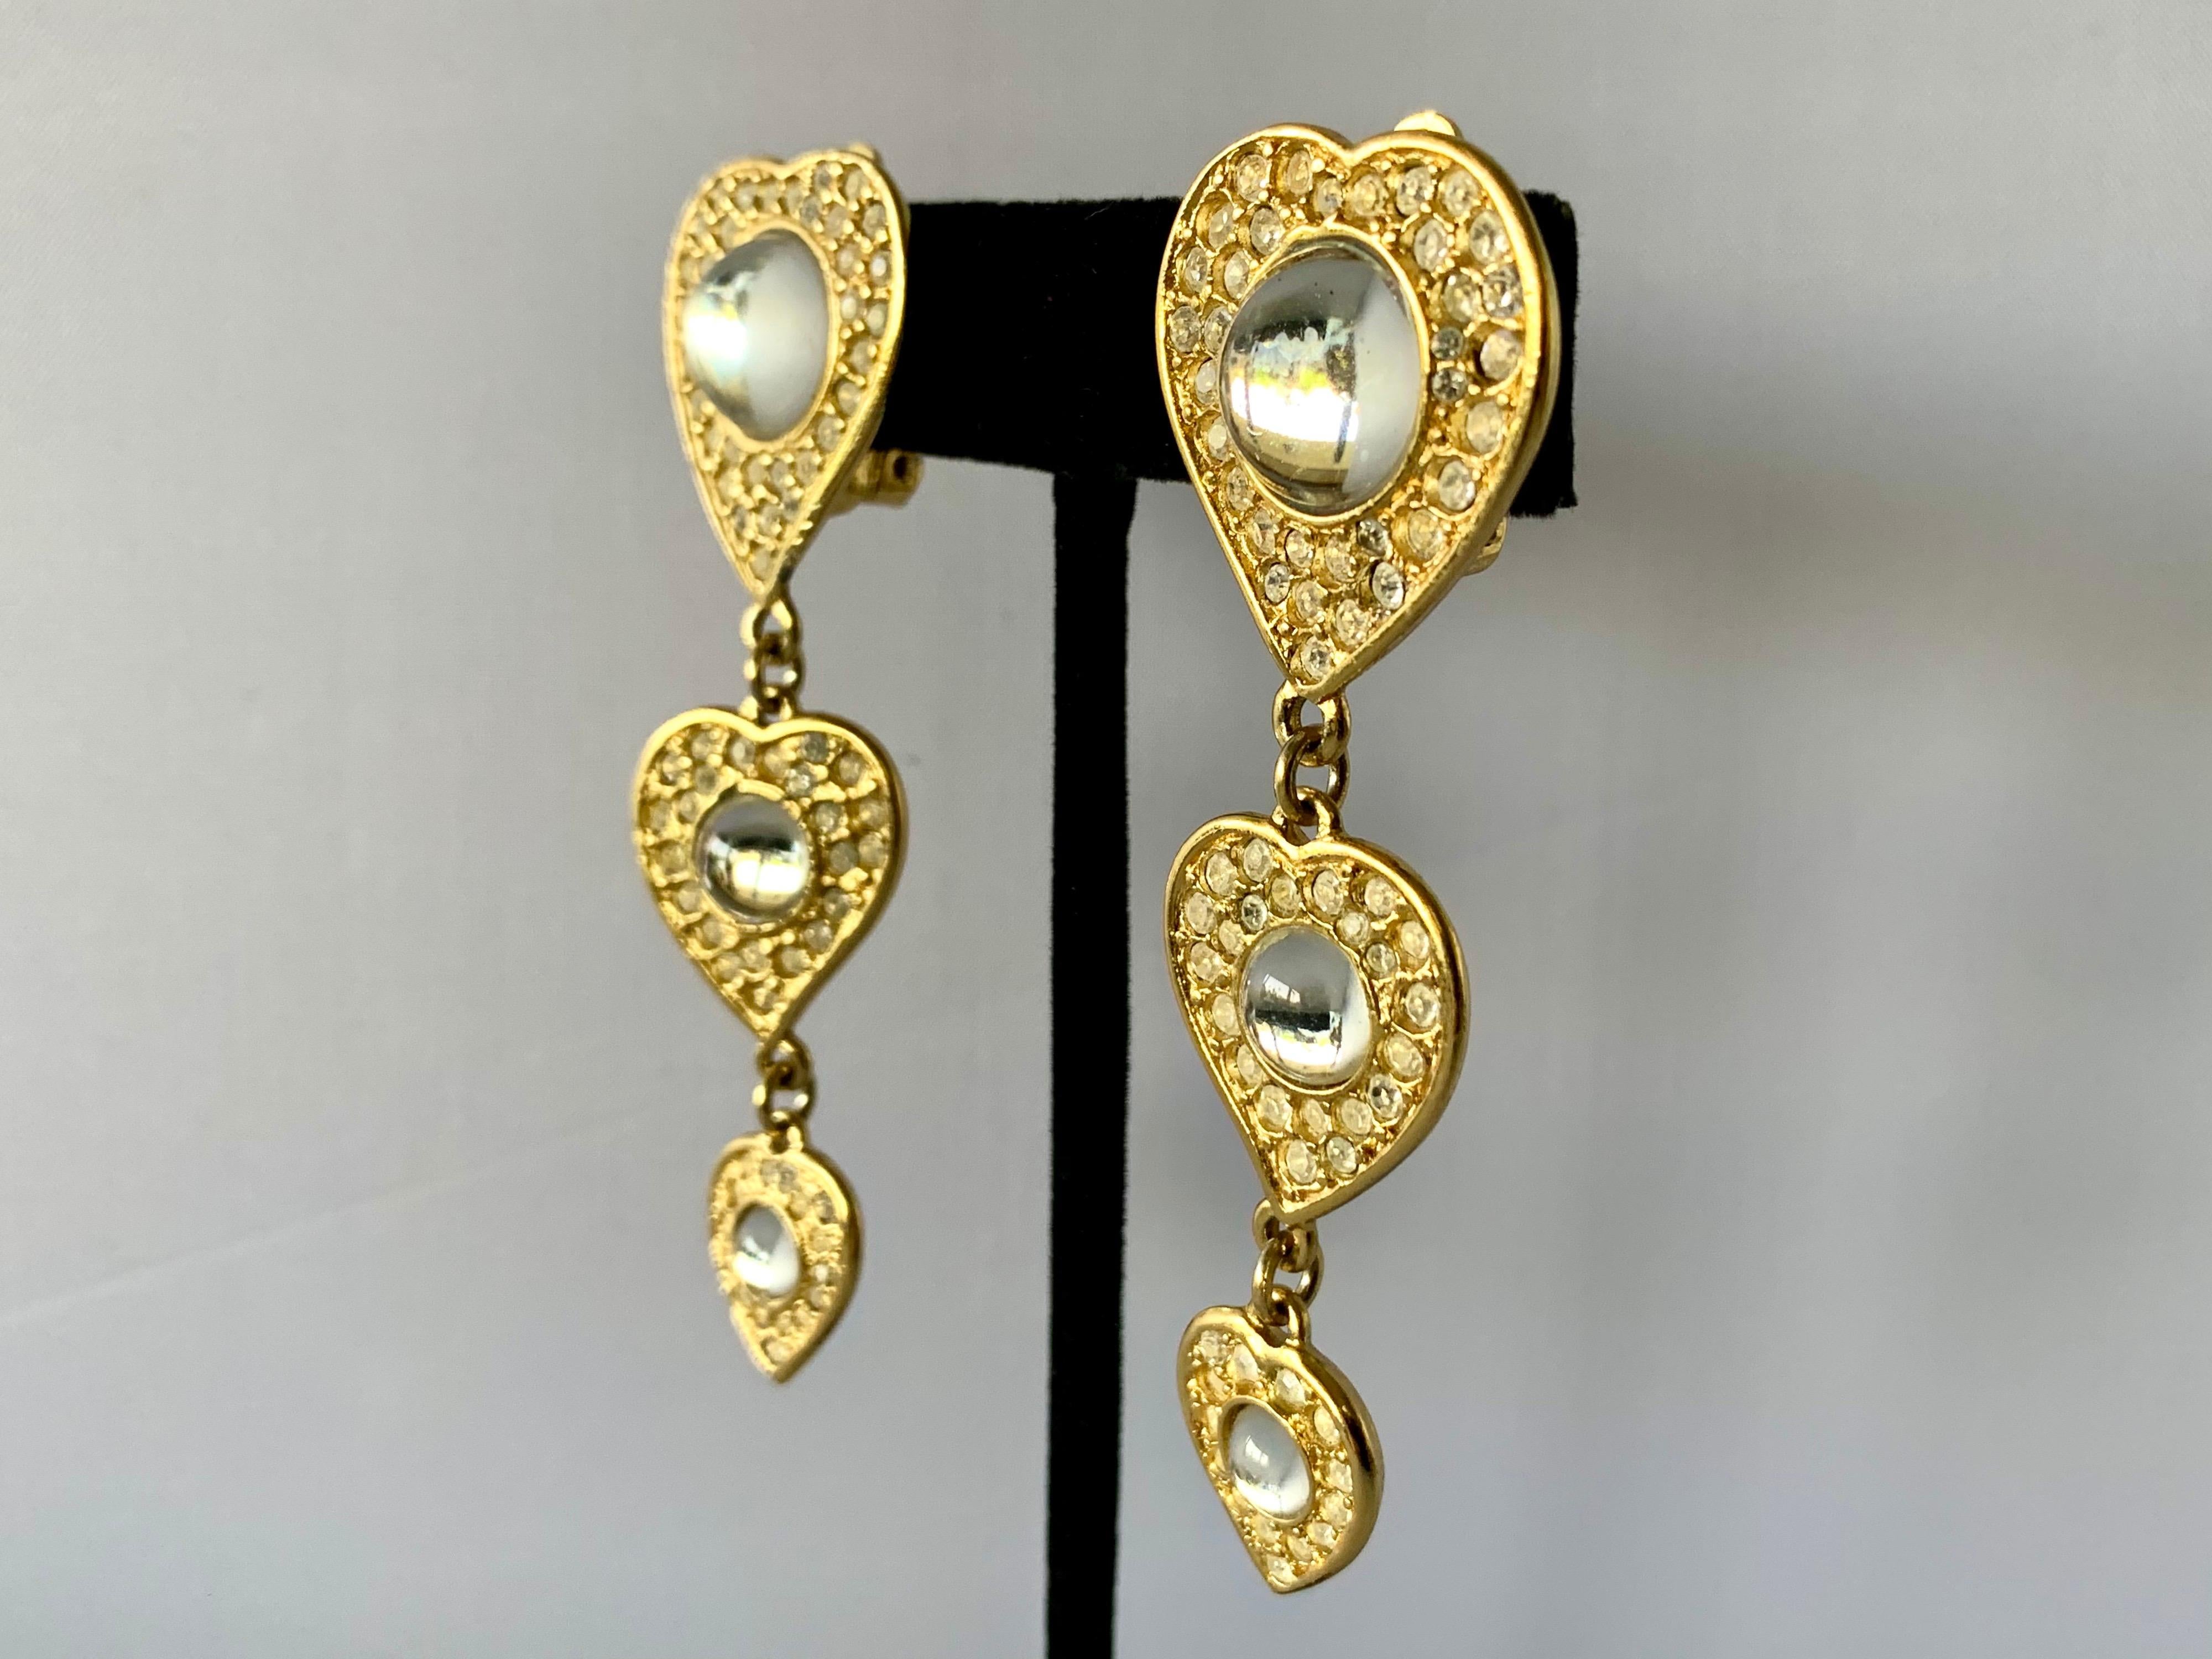 Vintage clip-on heart statement earrings comprised out of 